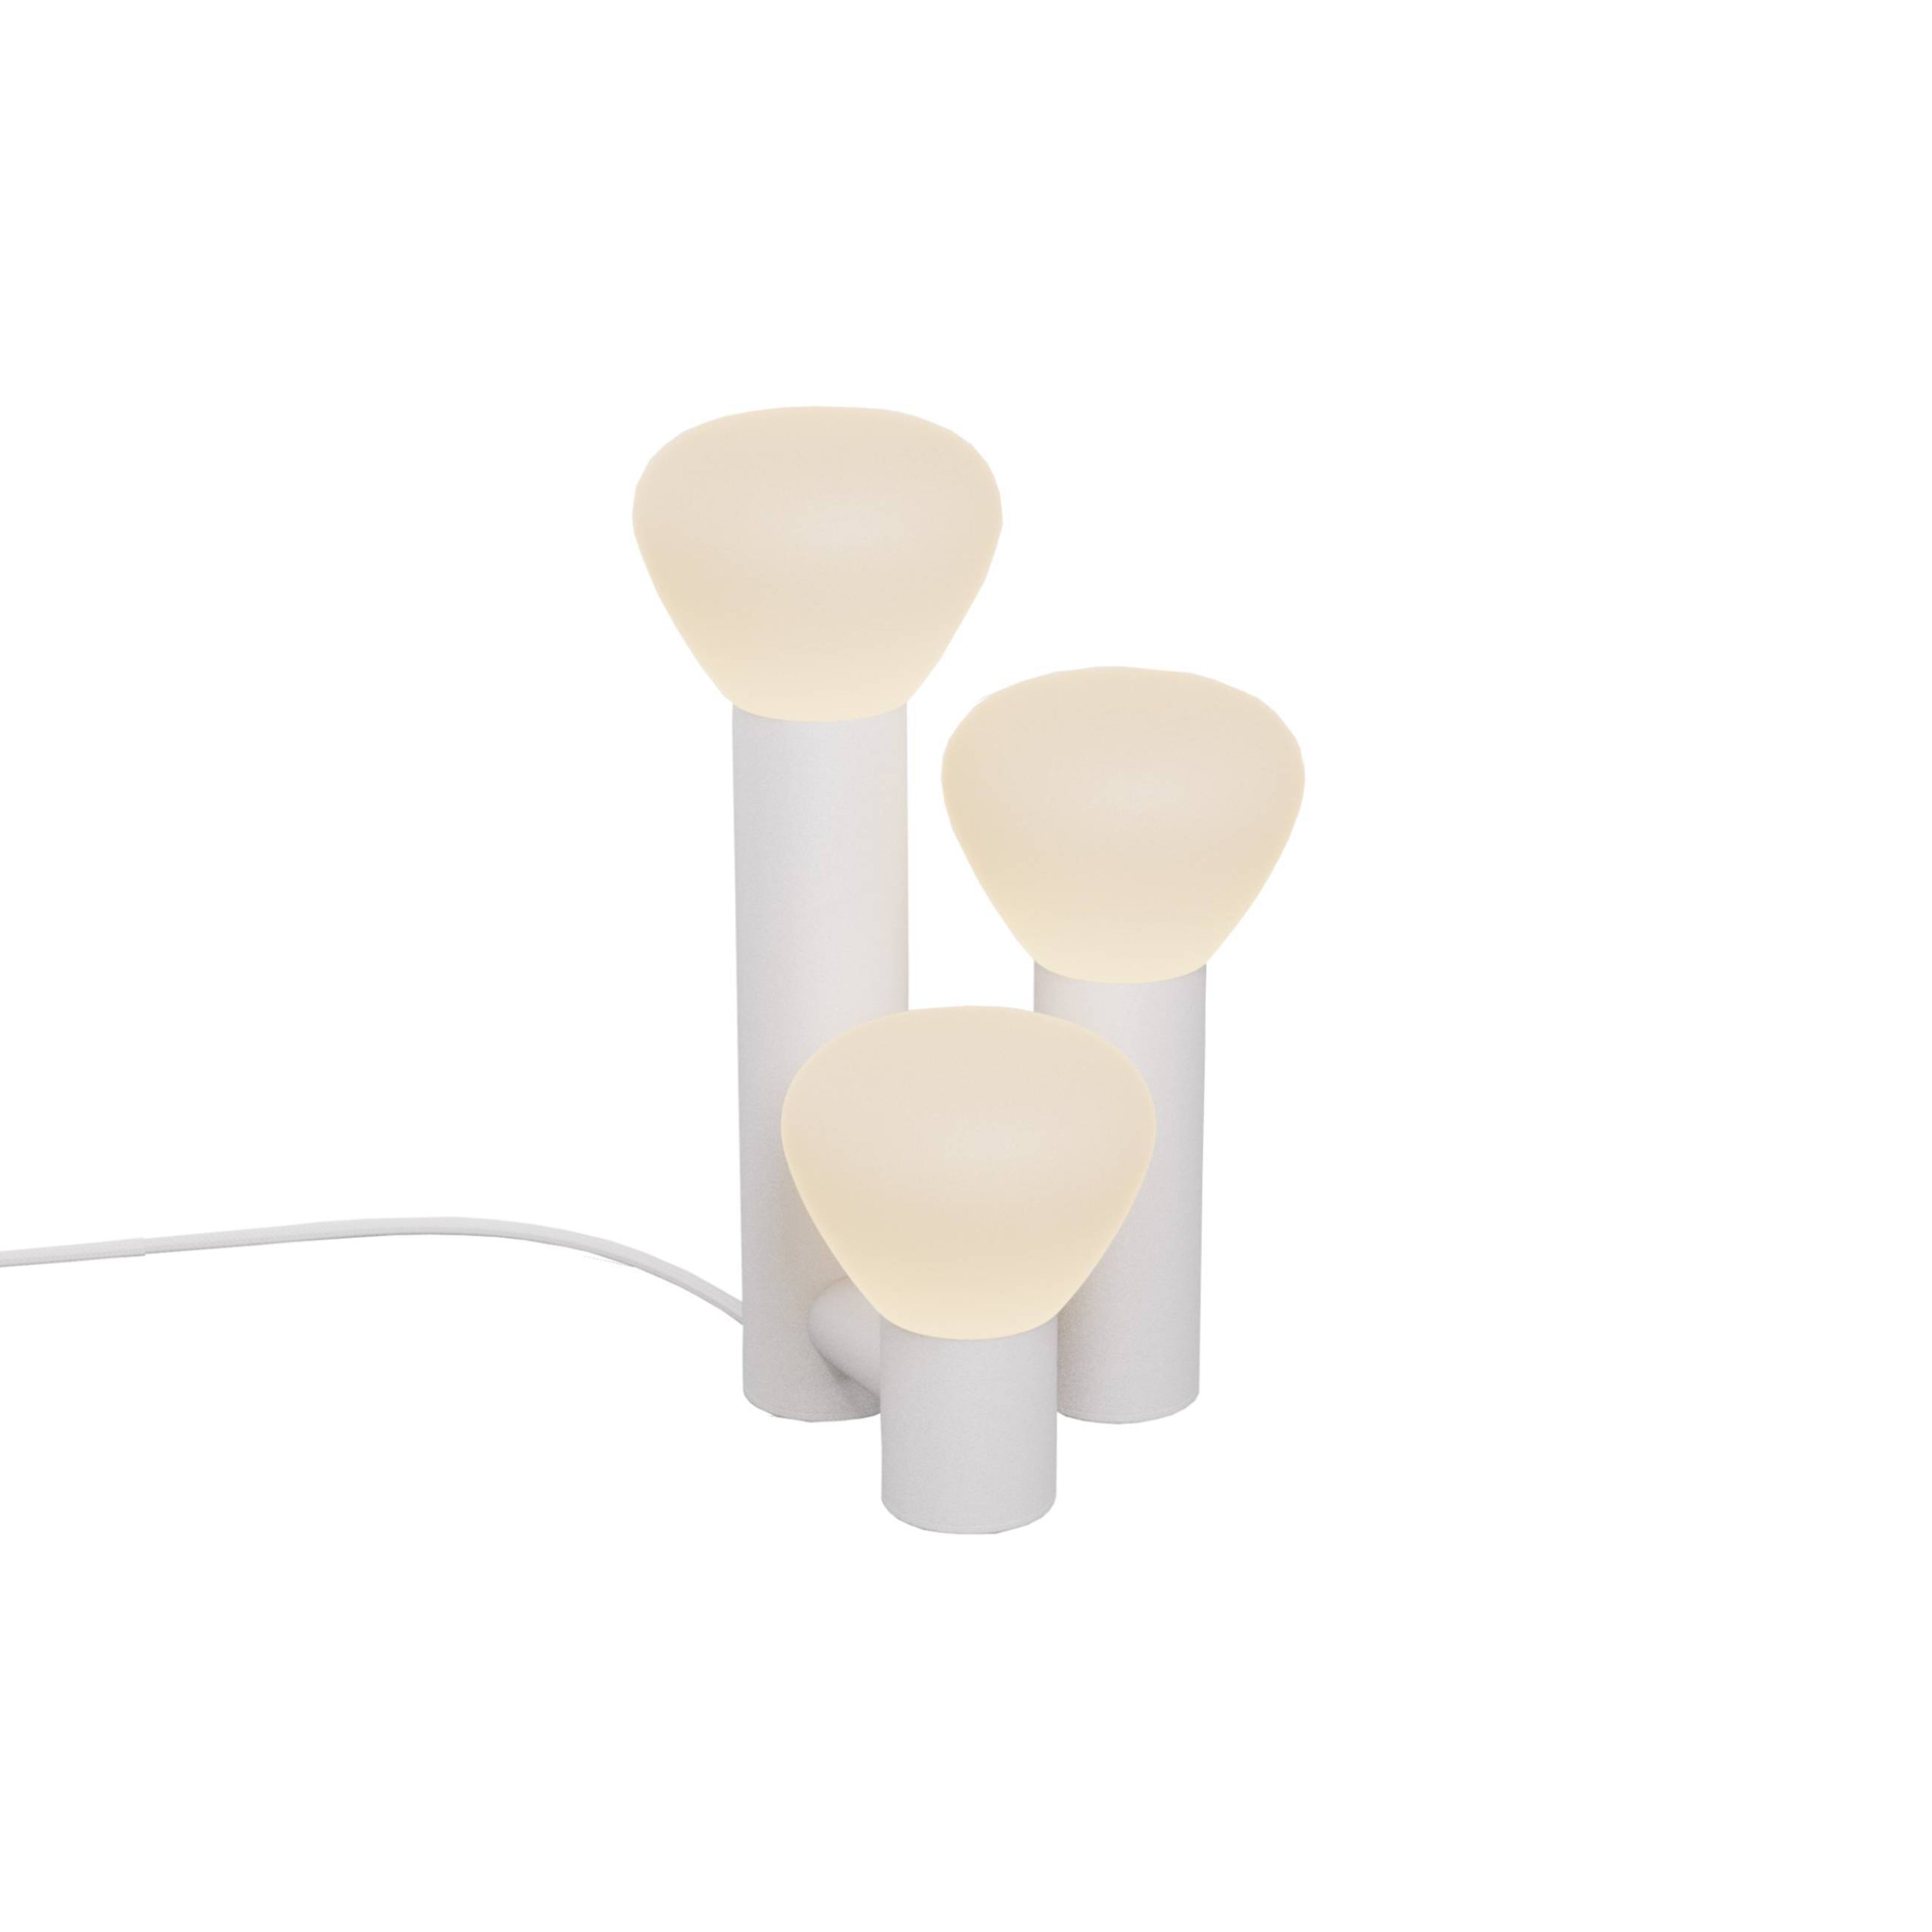 Parc 06 Table Lamp: Handswitch +  White + White